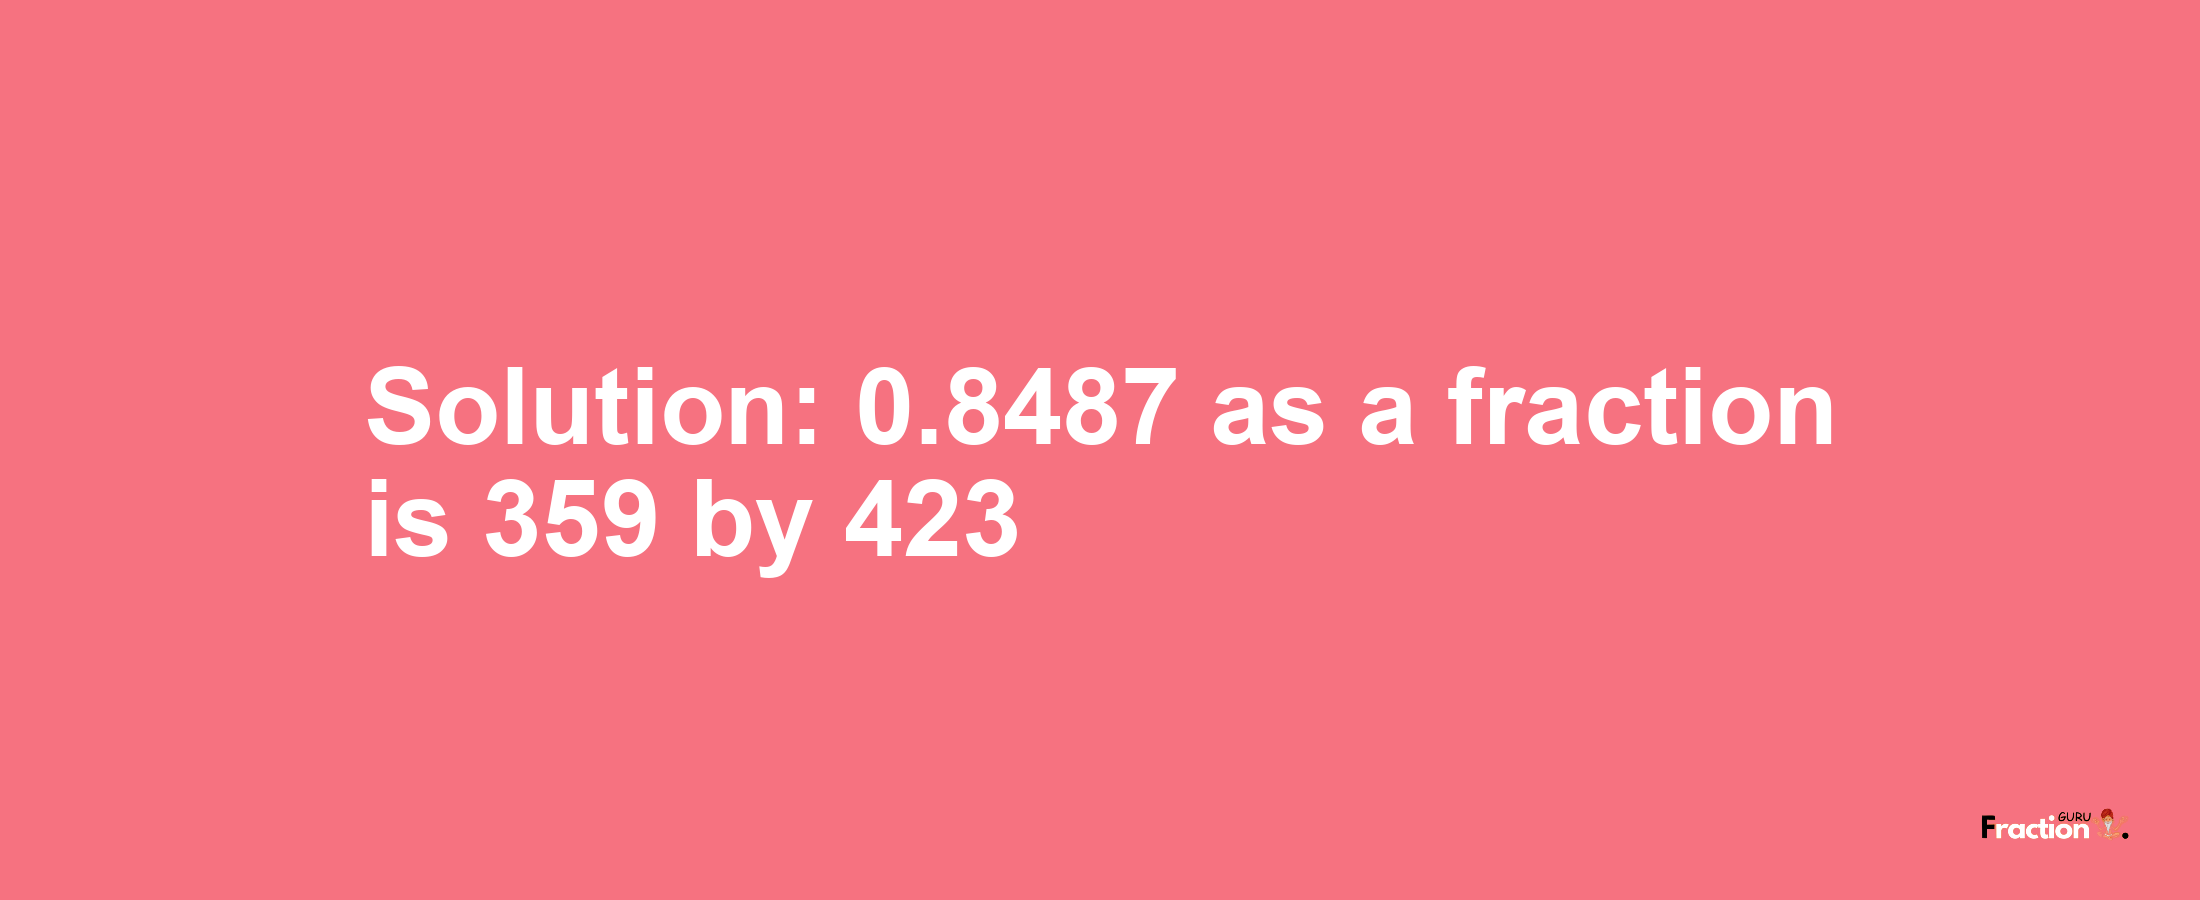 Solution:0.8487 as a fraction is 359/423